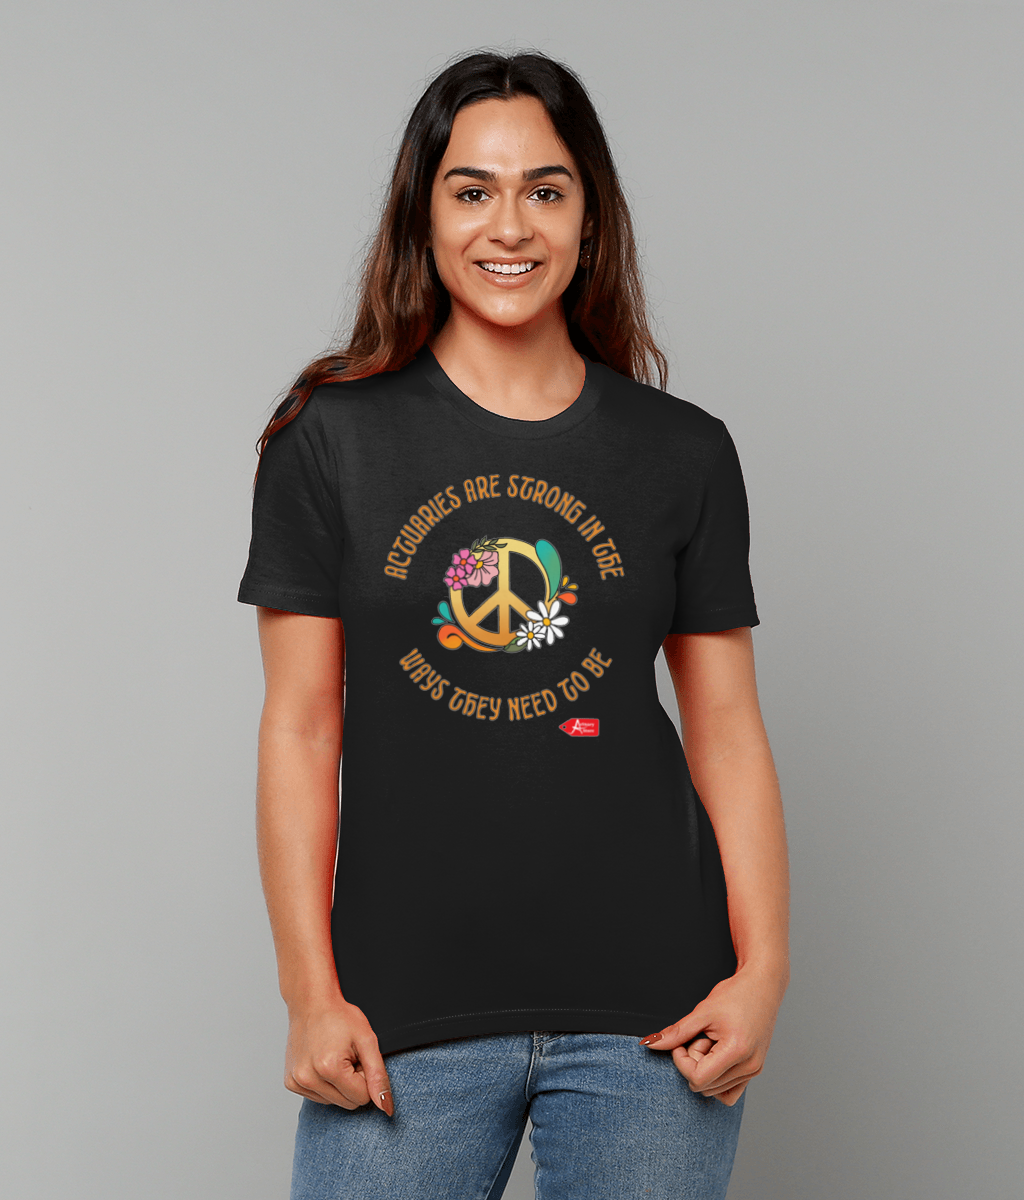 Actuaries are Strong In The Ways That They Need to Be Psychedelic T-Shirt (Black and White Variants)